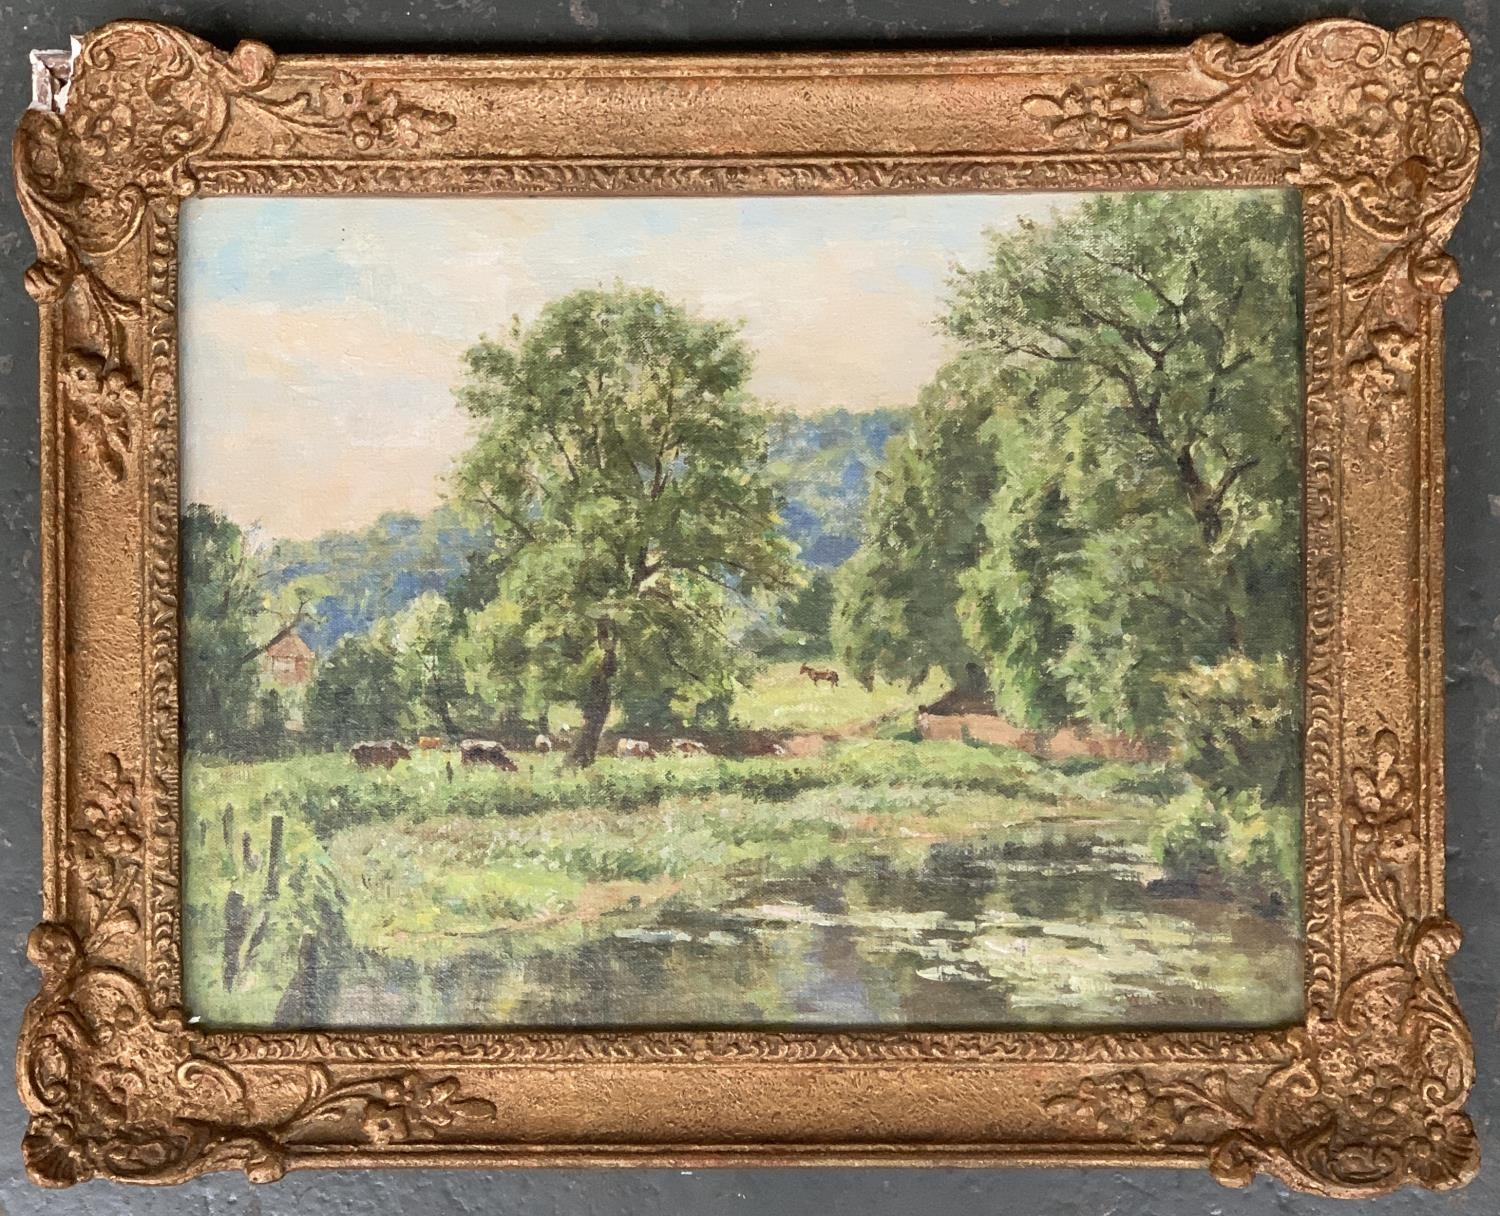 Walter John Stamps (1876–1964), cattle grazing by a river, oil on canvas, signed, 29.5x40cm